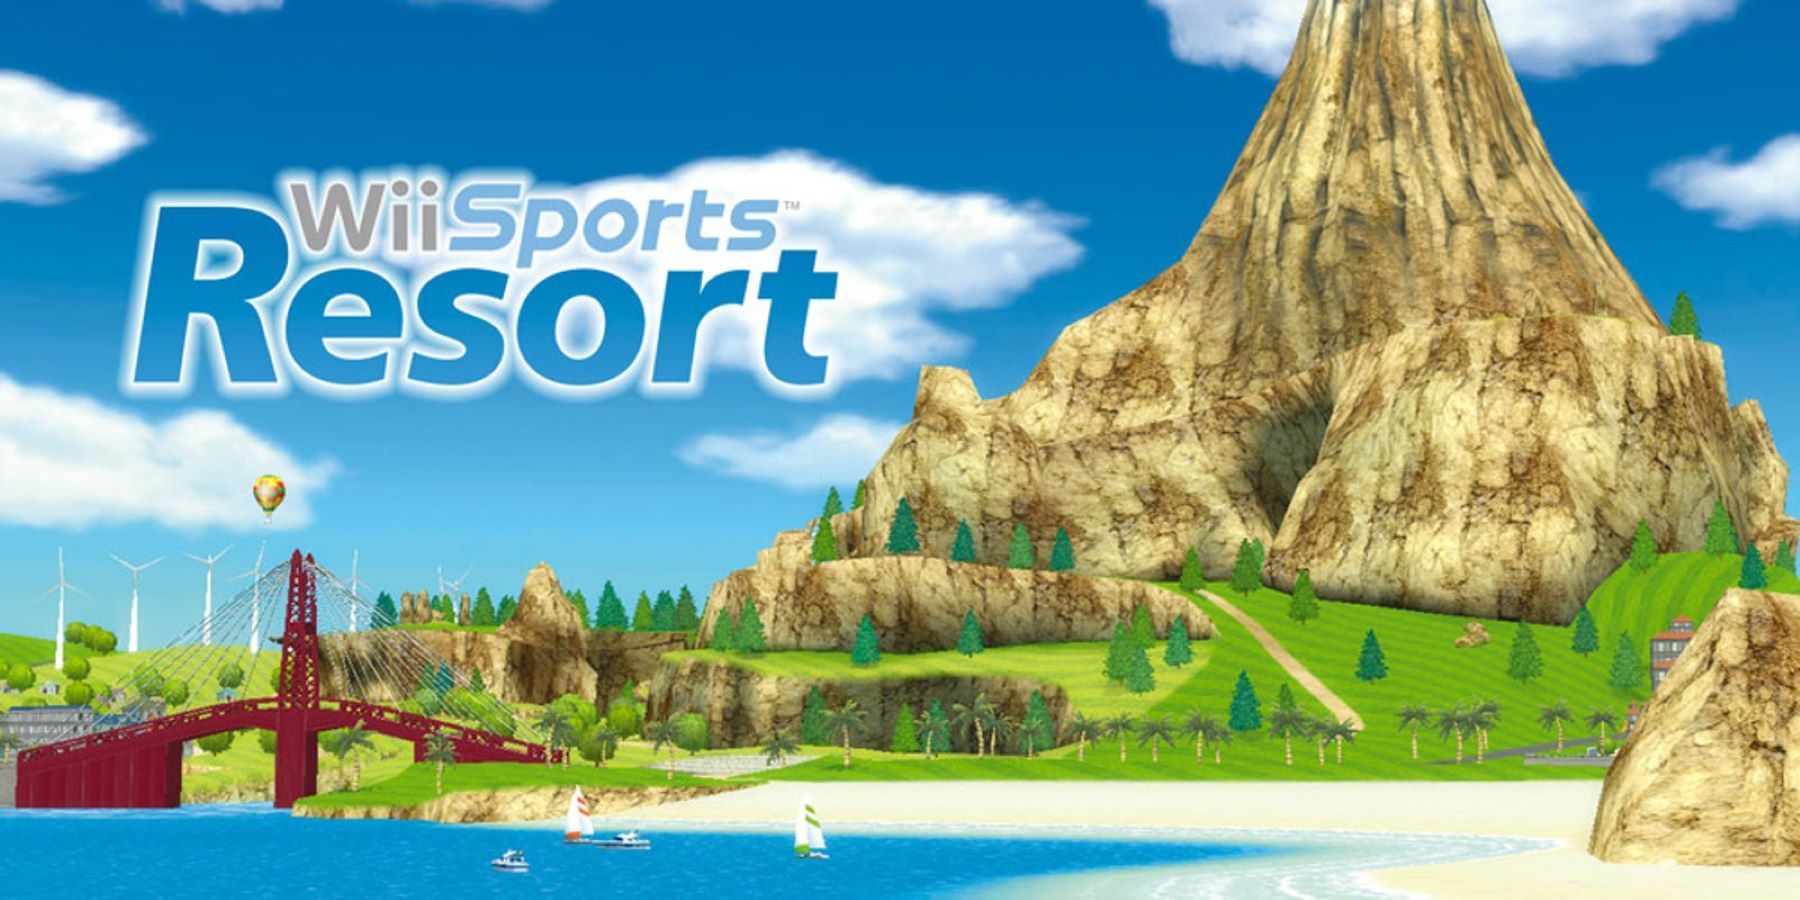 The Wii Sports Resort logo with Wuhu Island in the background